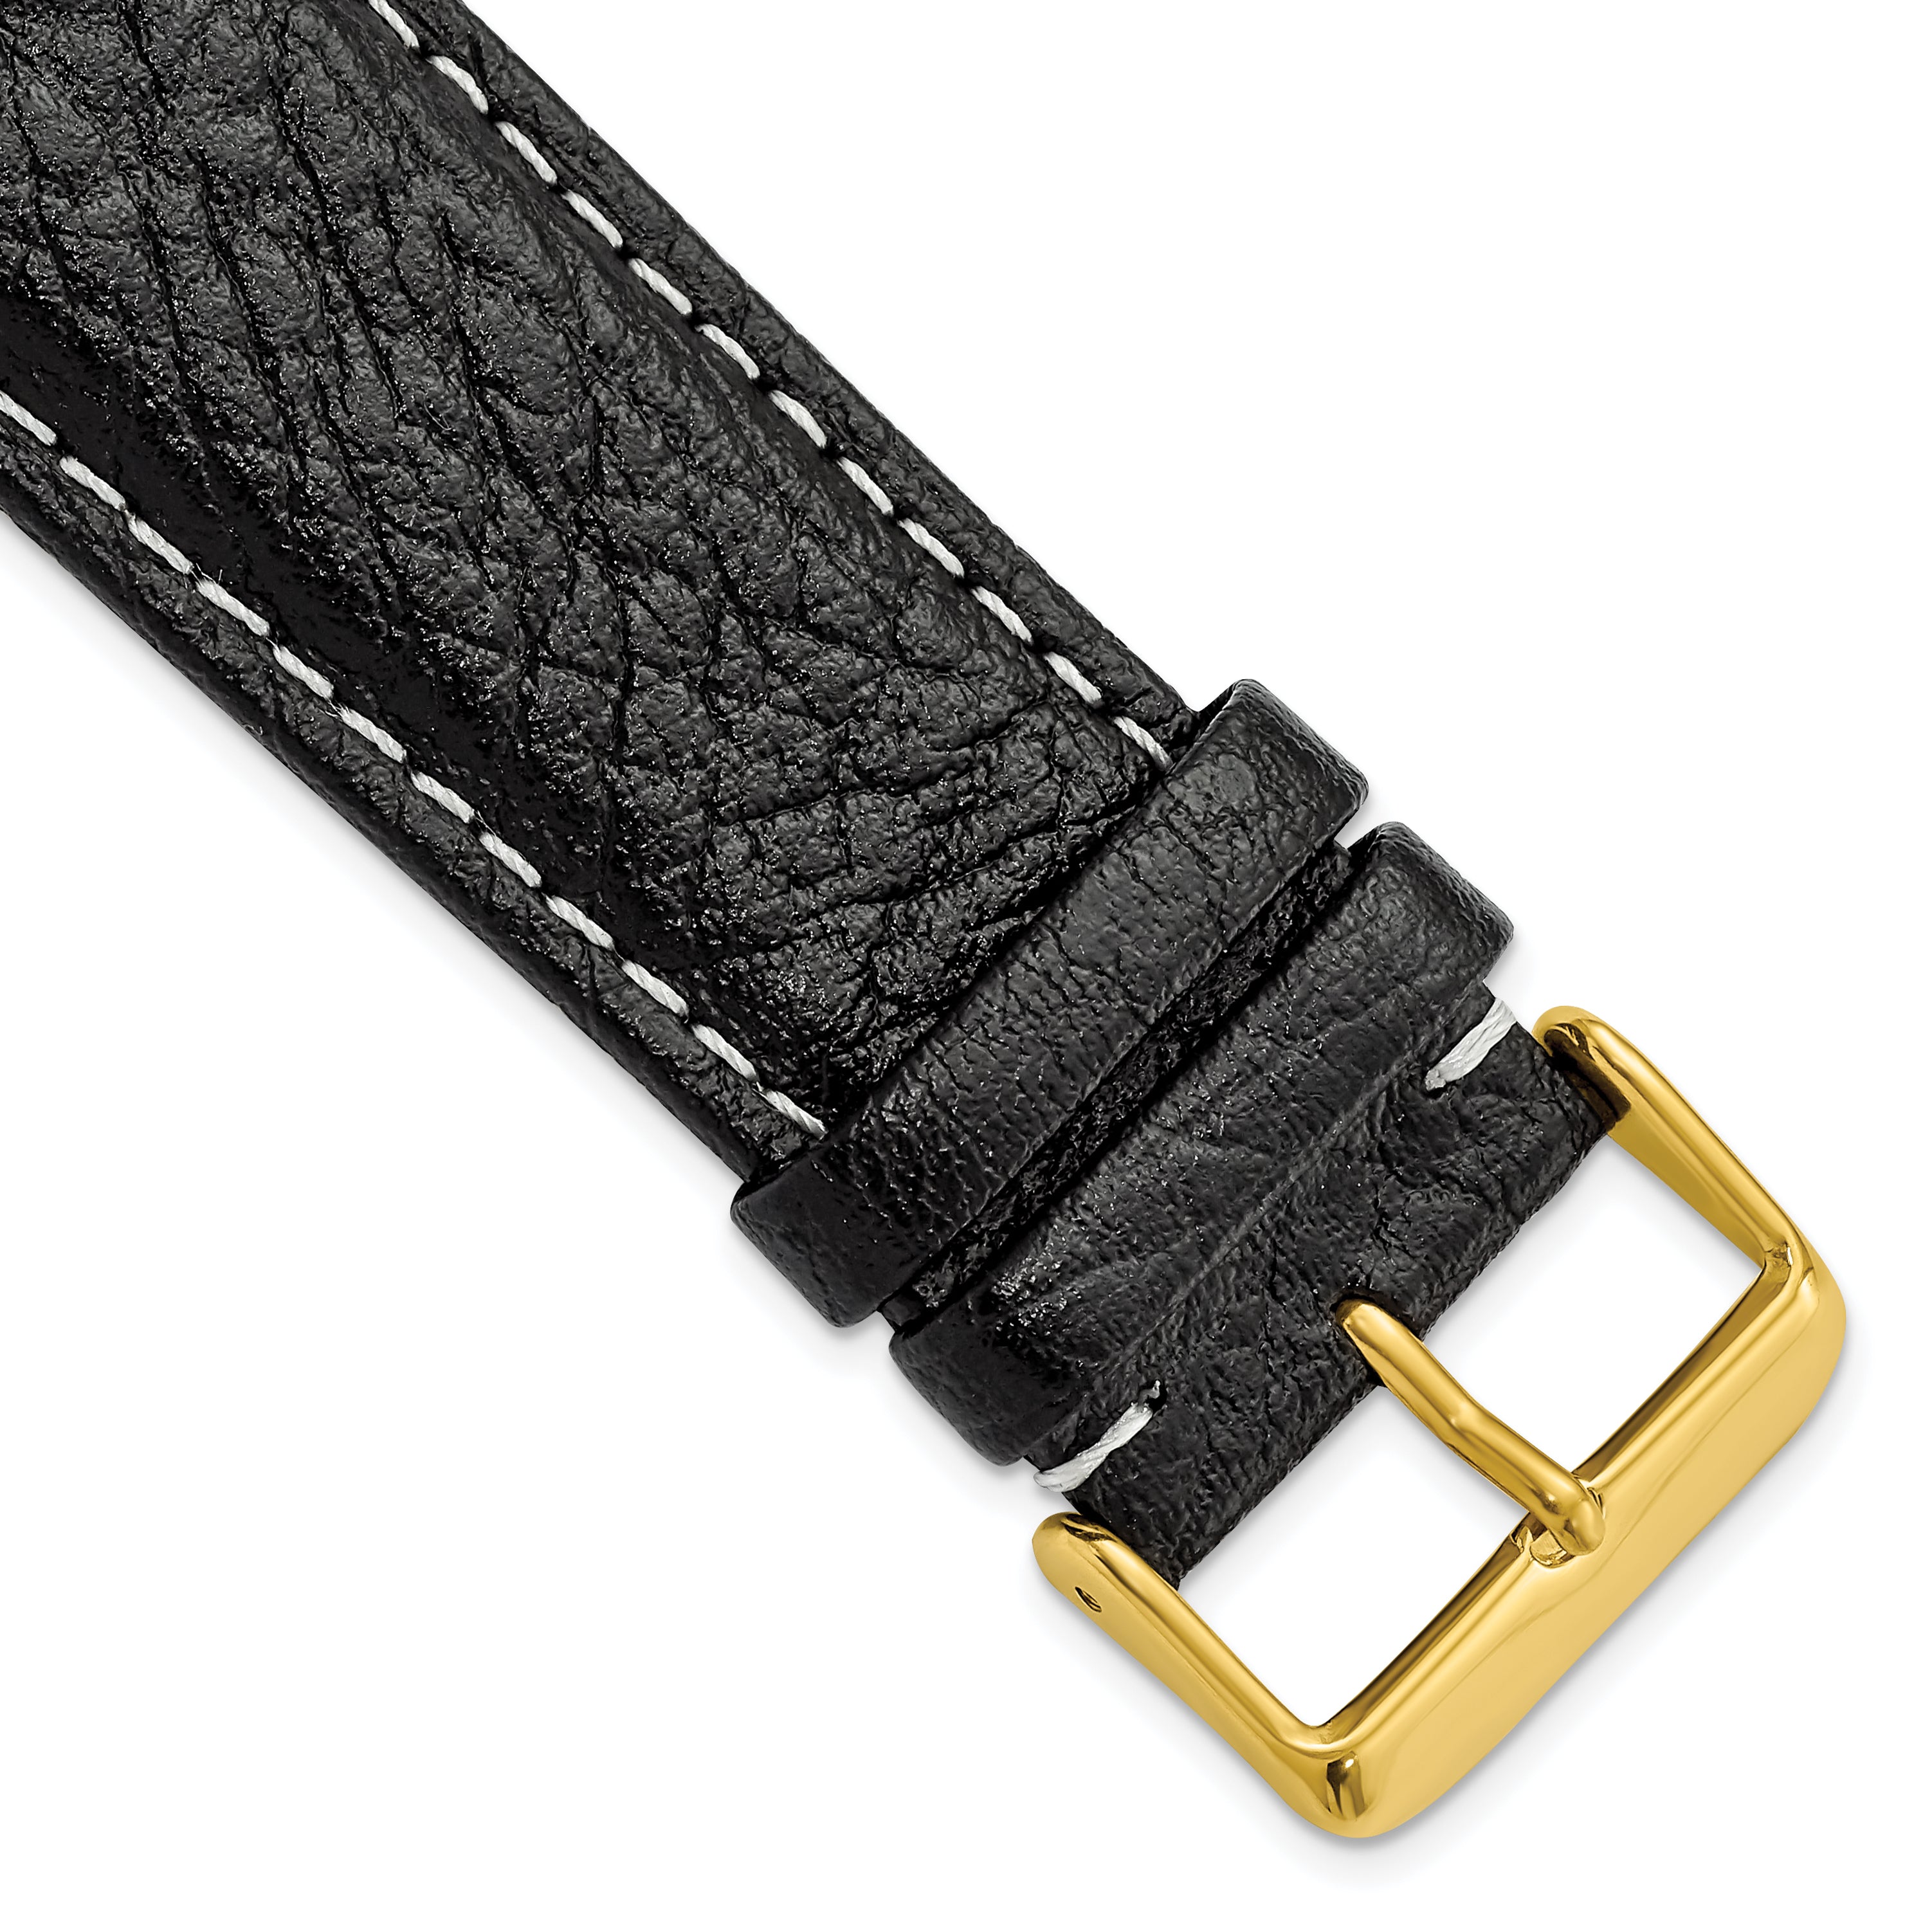 DeBeer 26mm Black Sport Leather with White Stitching and Gold-tone Buckle 7.5 inch Watch Band